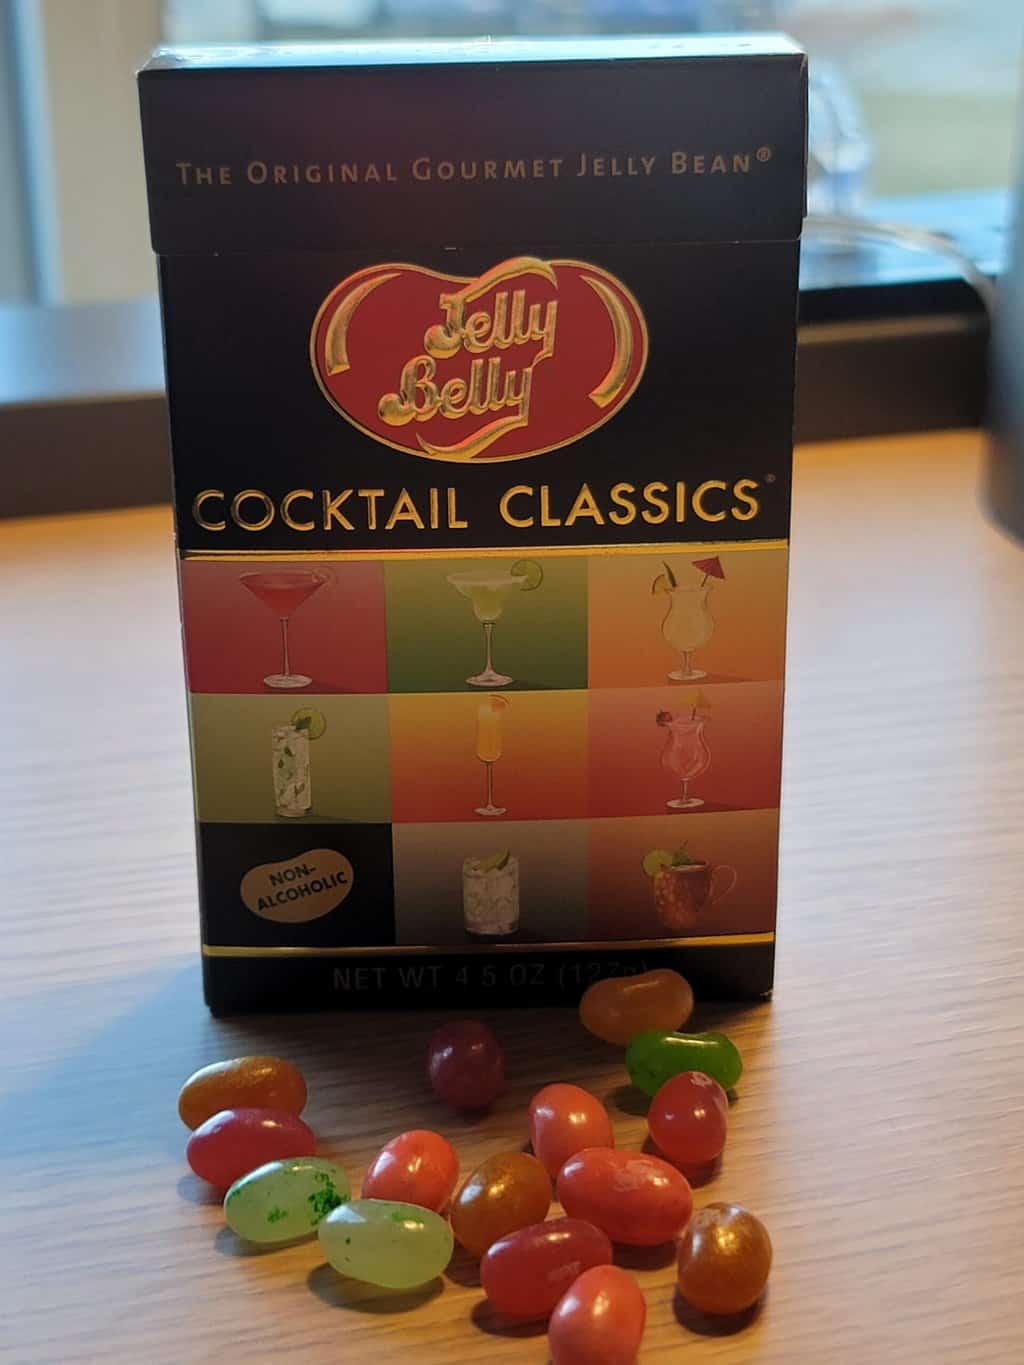 Jelly Belly Cocktail Classics Box with beans